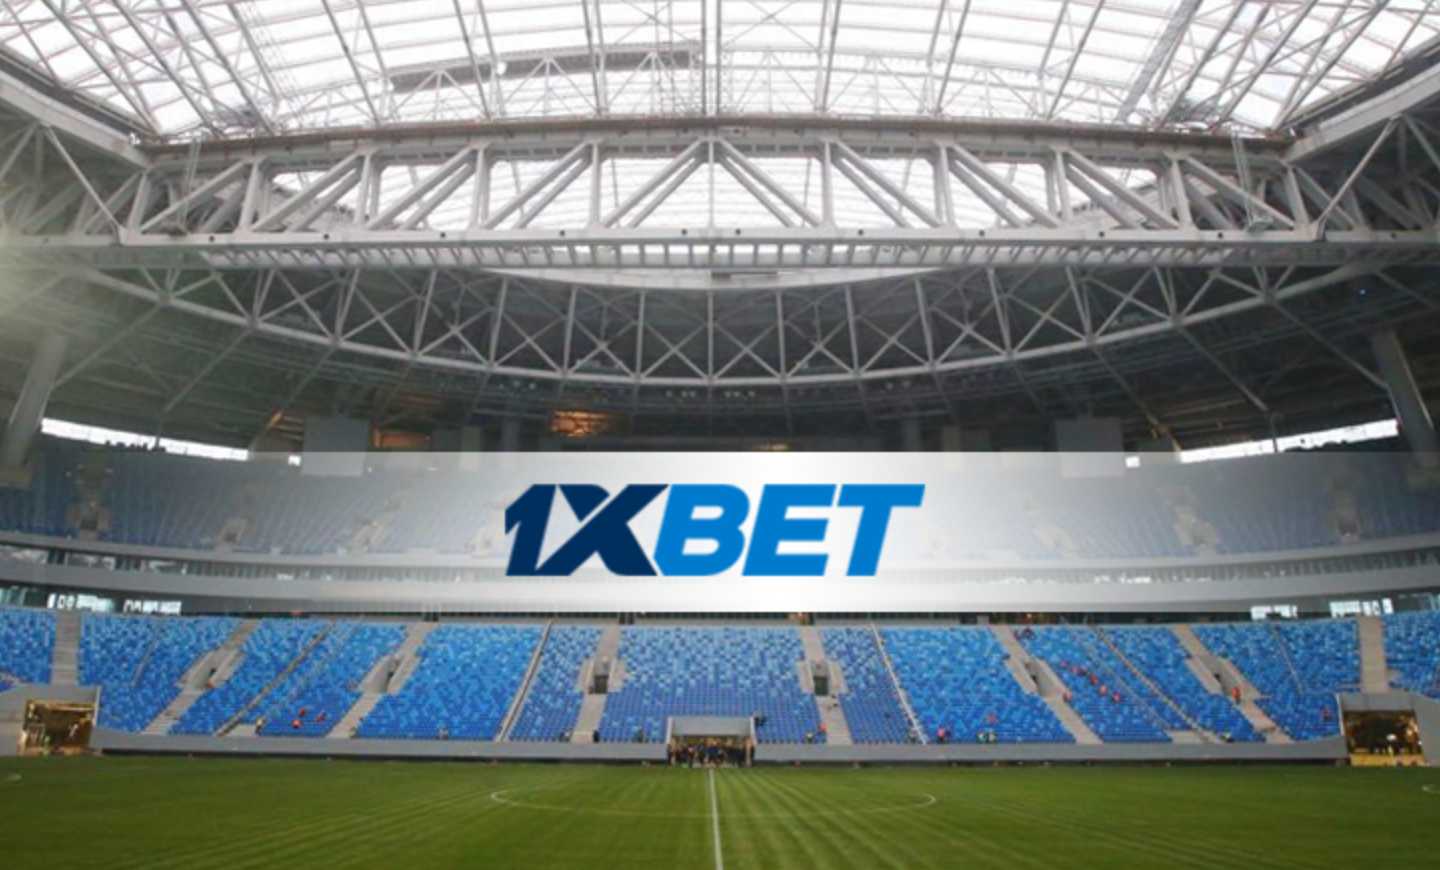 How does 1xBet work?